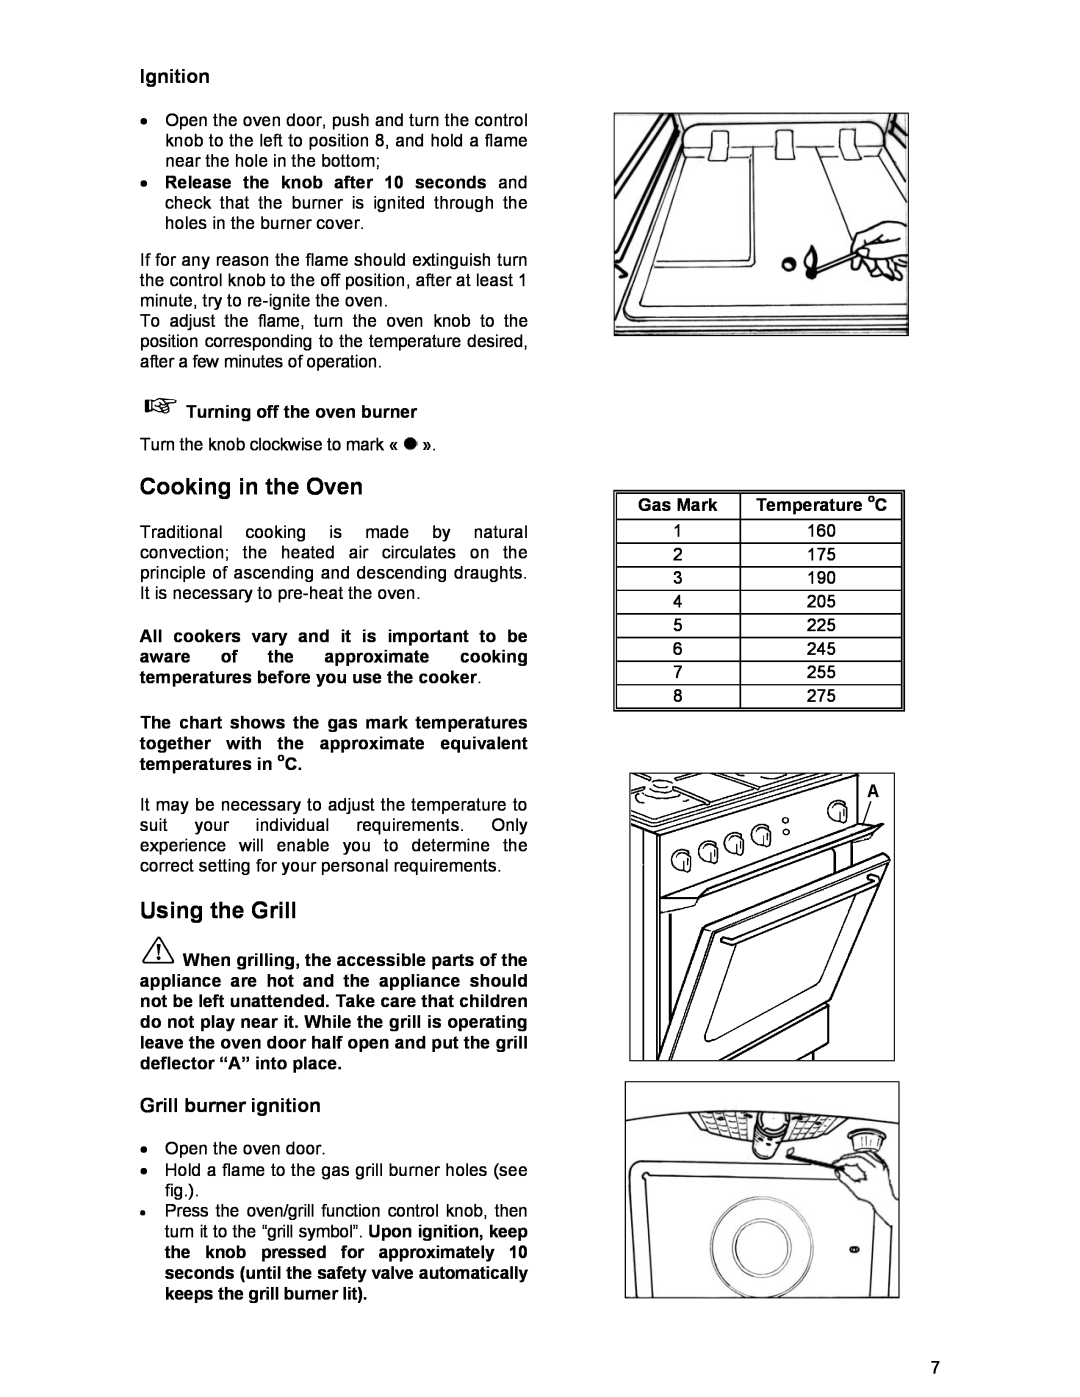 Electrolux SIG 233 manual Cooking in the Oven, Using the Grill, Ignition, Grill burner ignition 